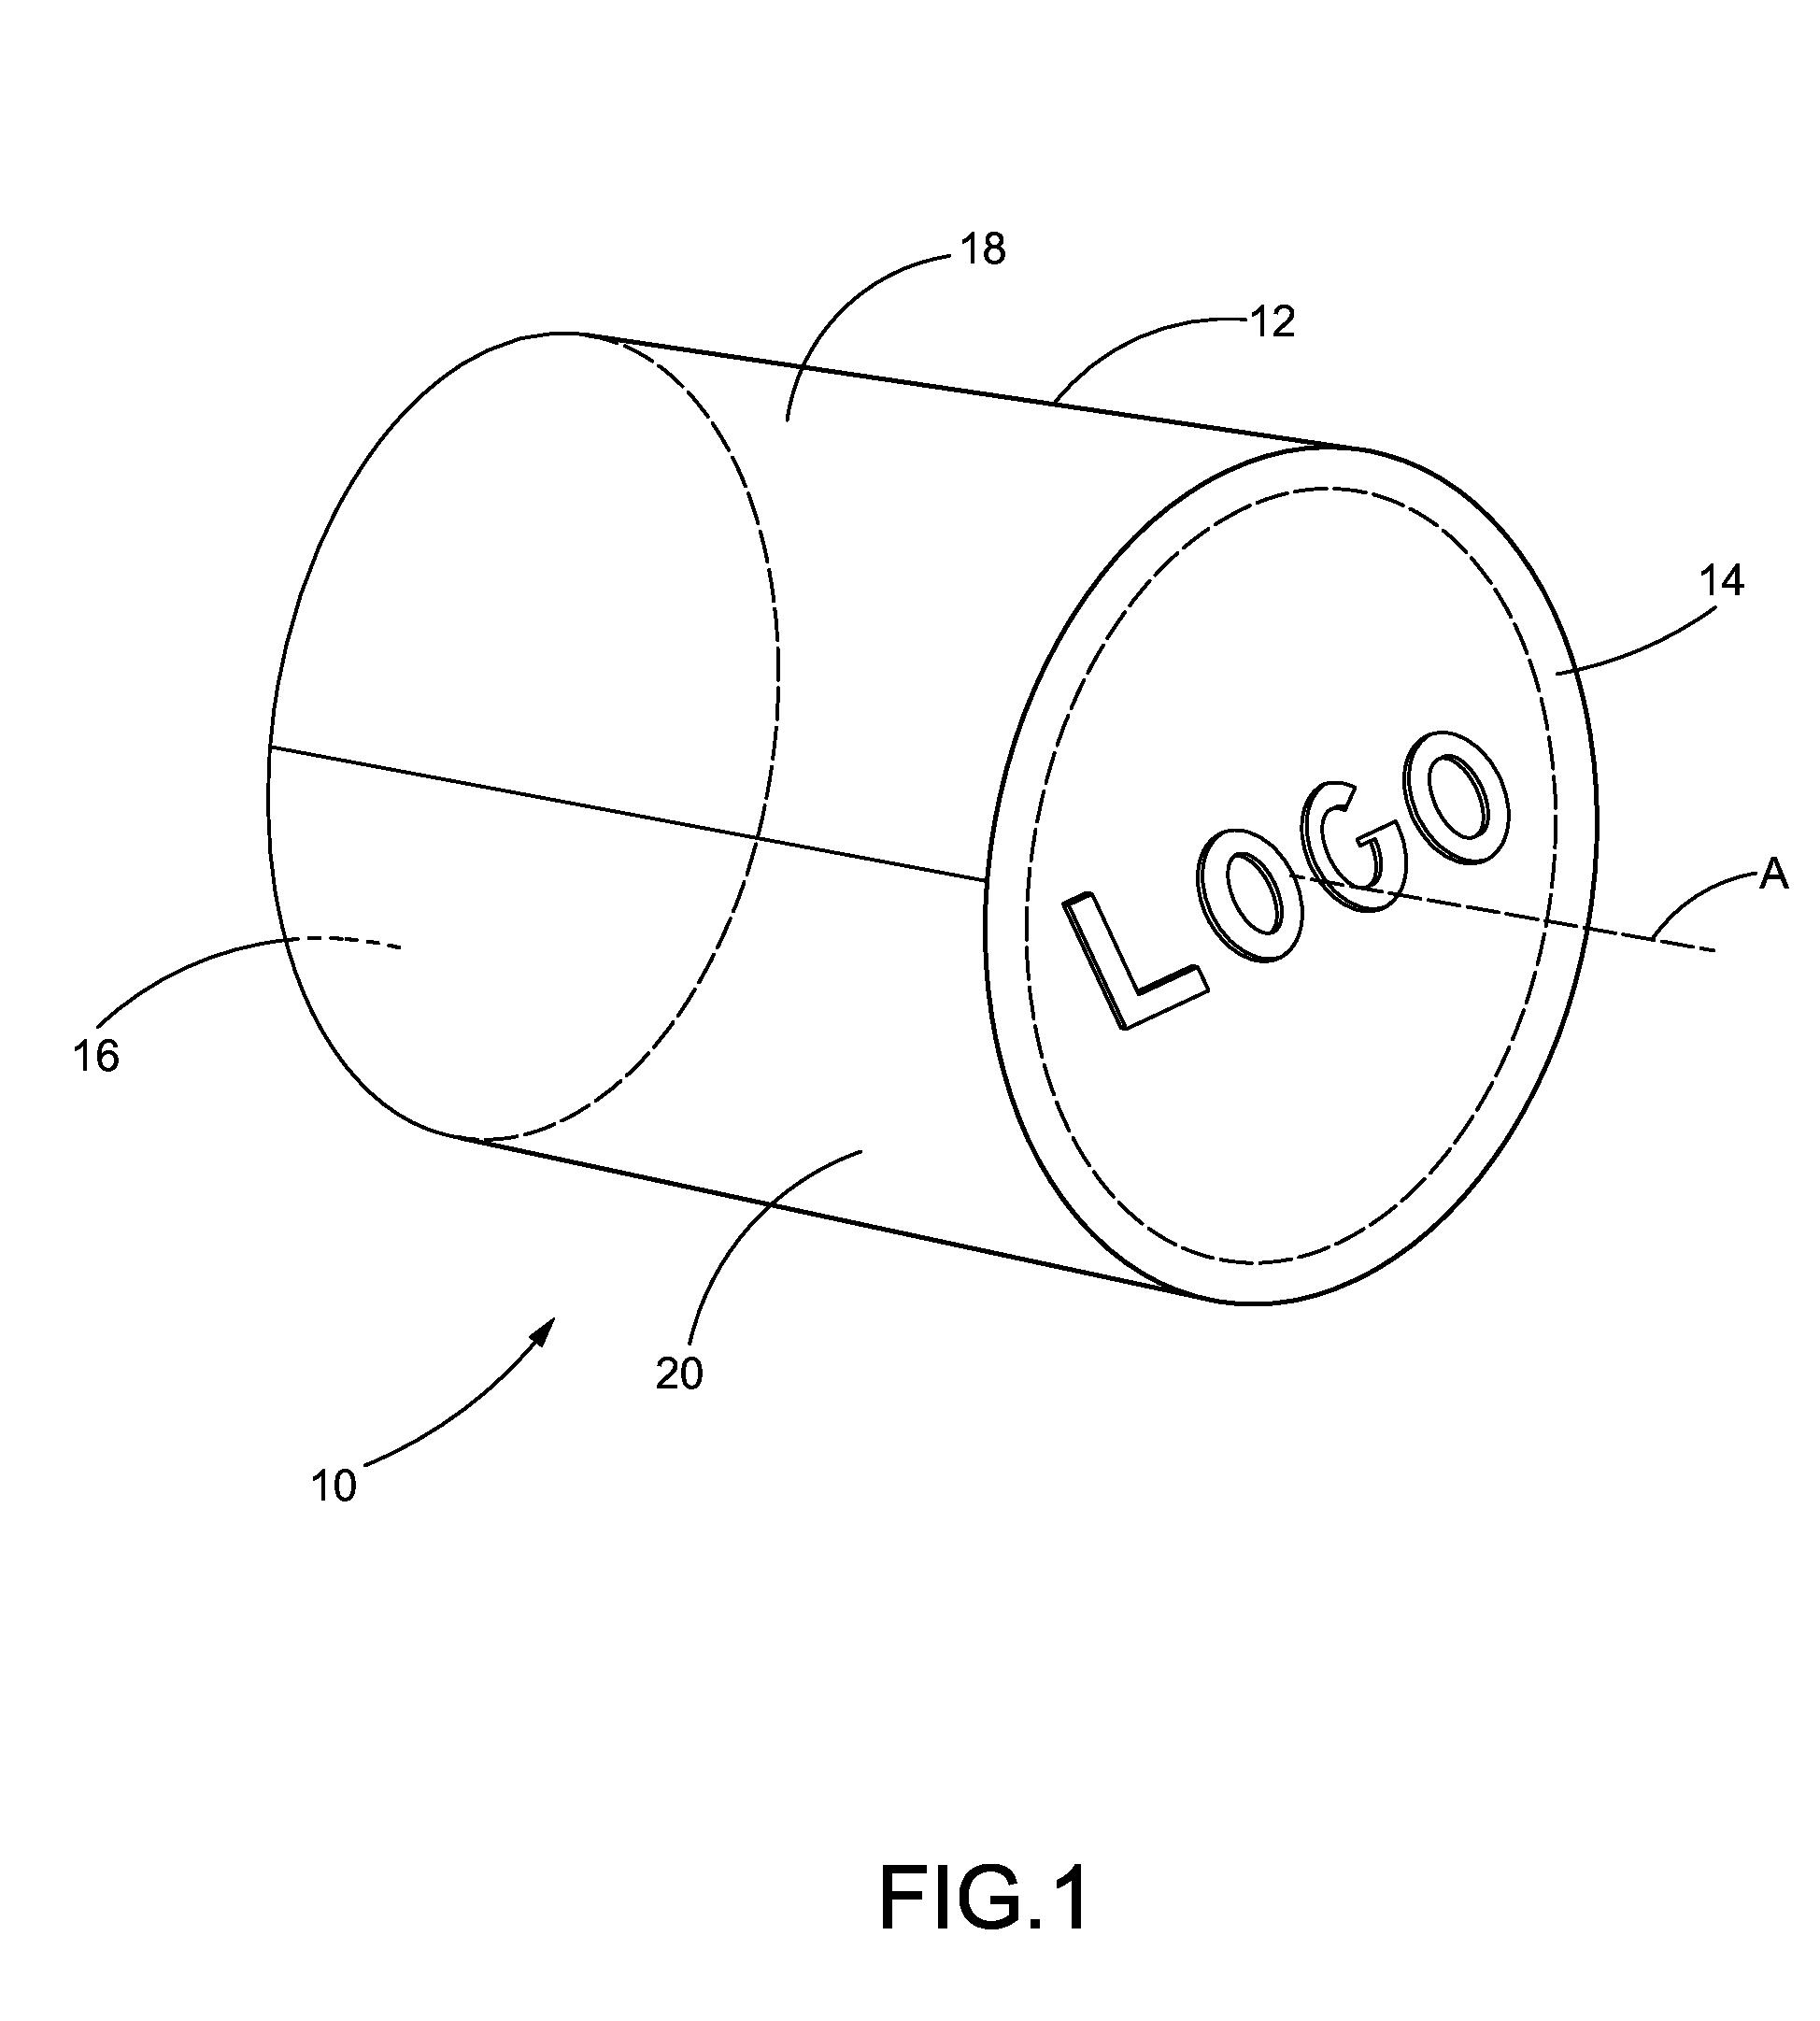 Apparatus and Method for Forming a Design on an Expanded Bead Foam Article